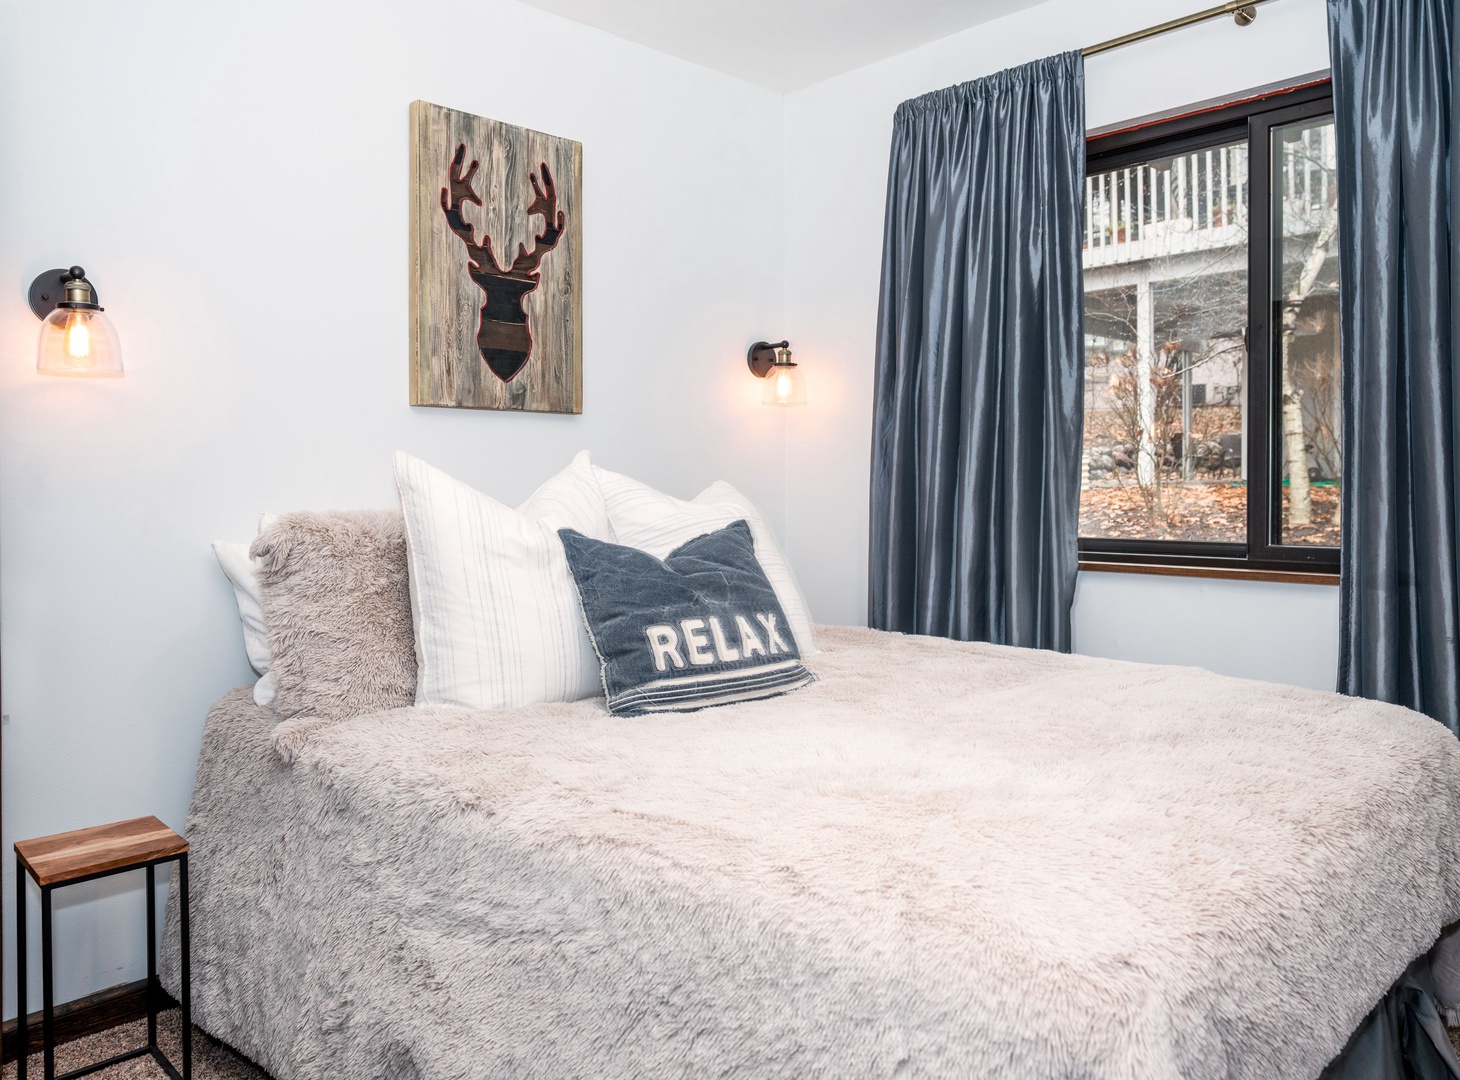 The second bedroom retreat includes a plush queen bed